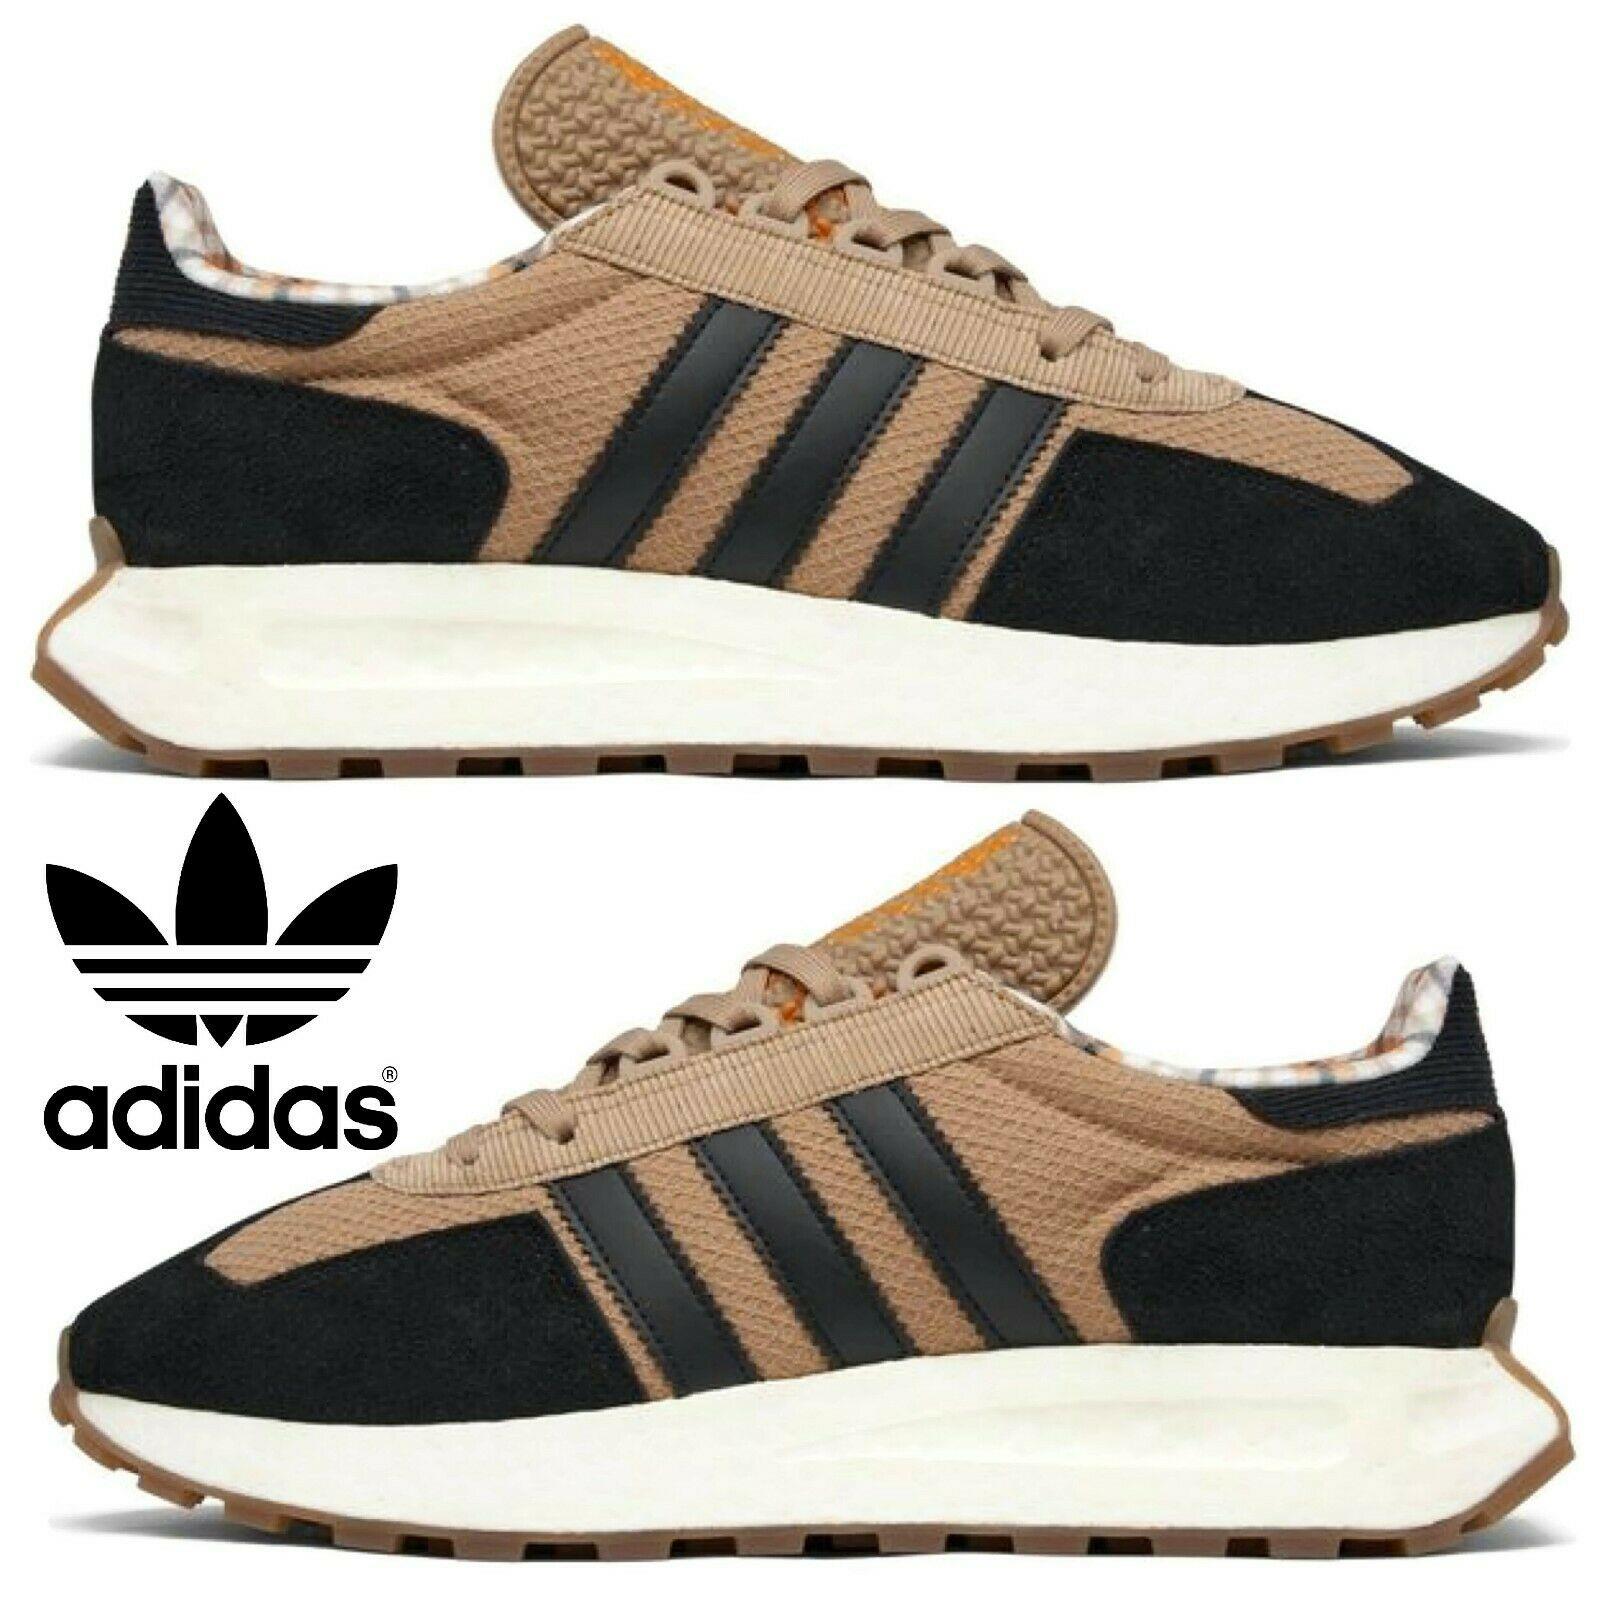 Adidas Retropy E5 Men`s Sneakers Running Shoes Gym Casual Sport Black Brown